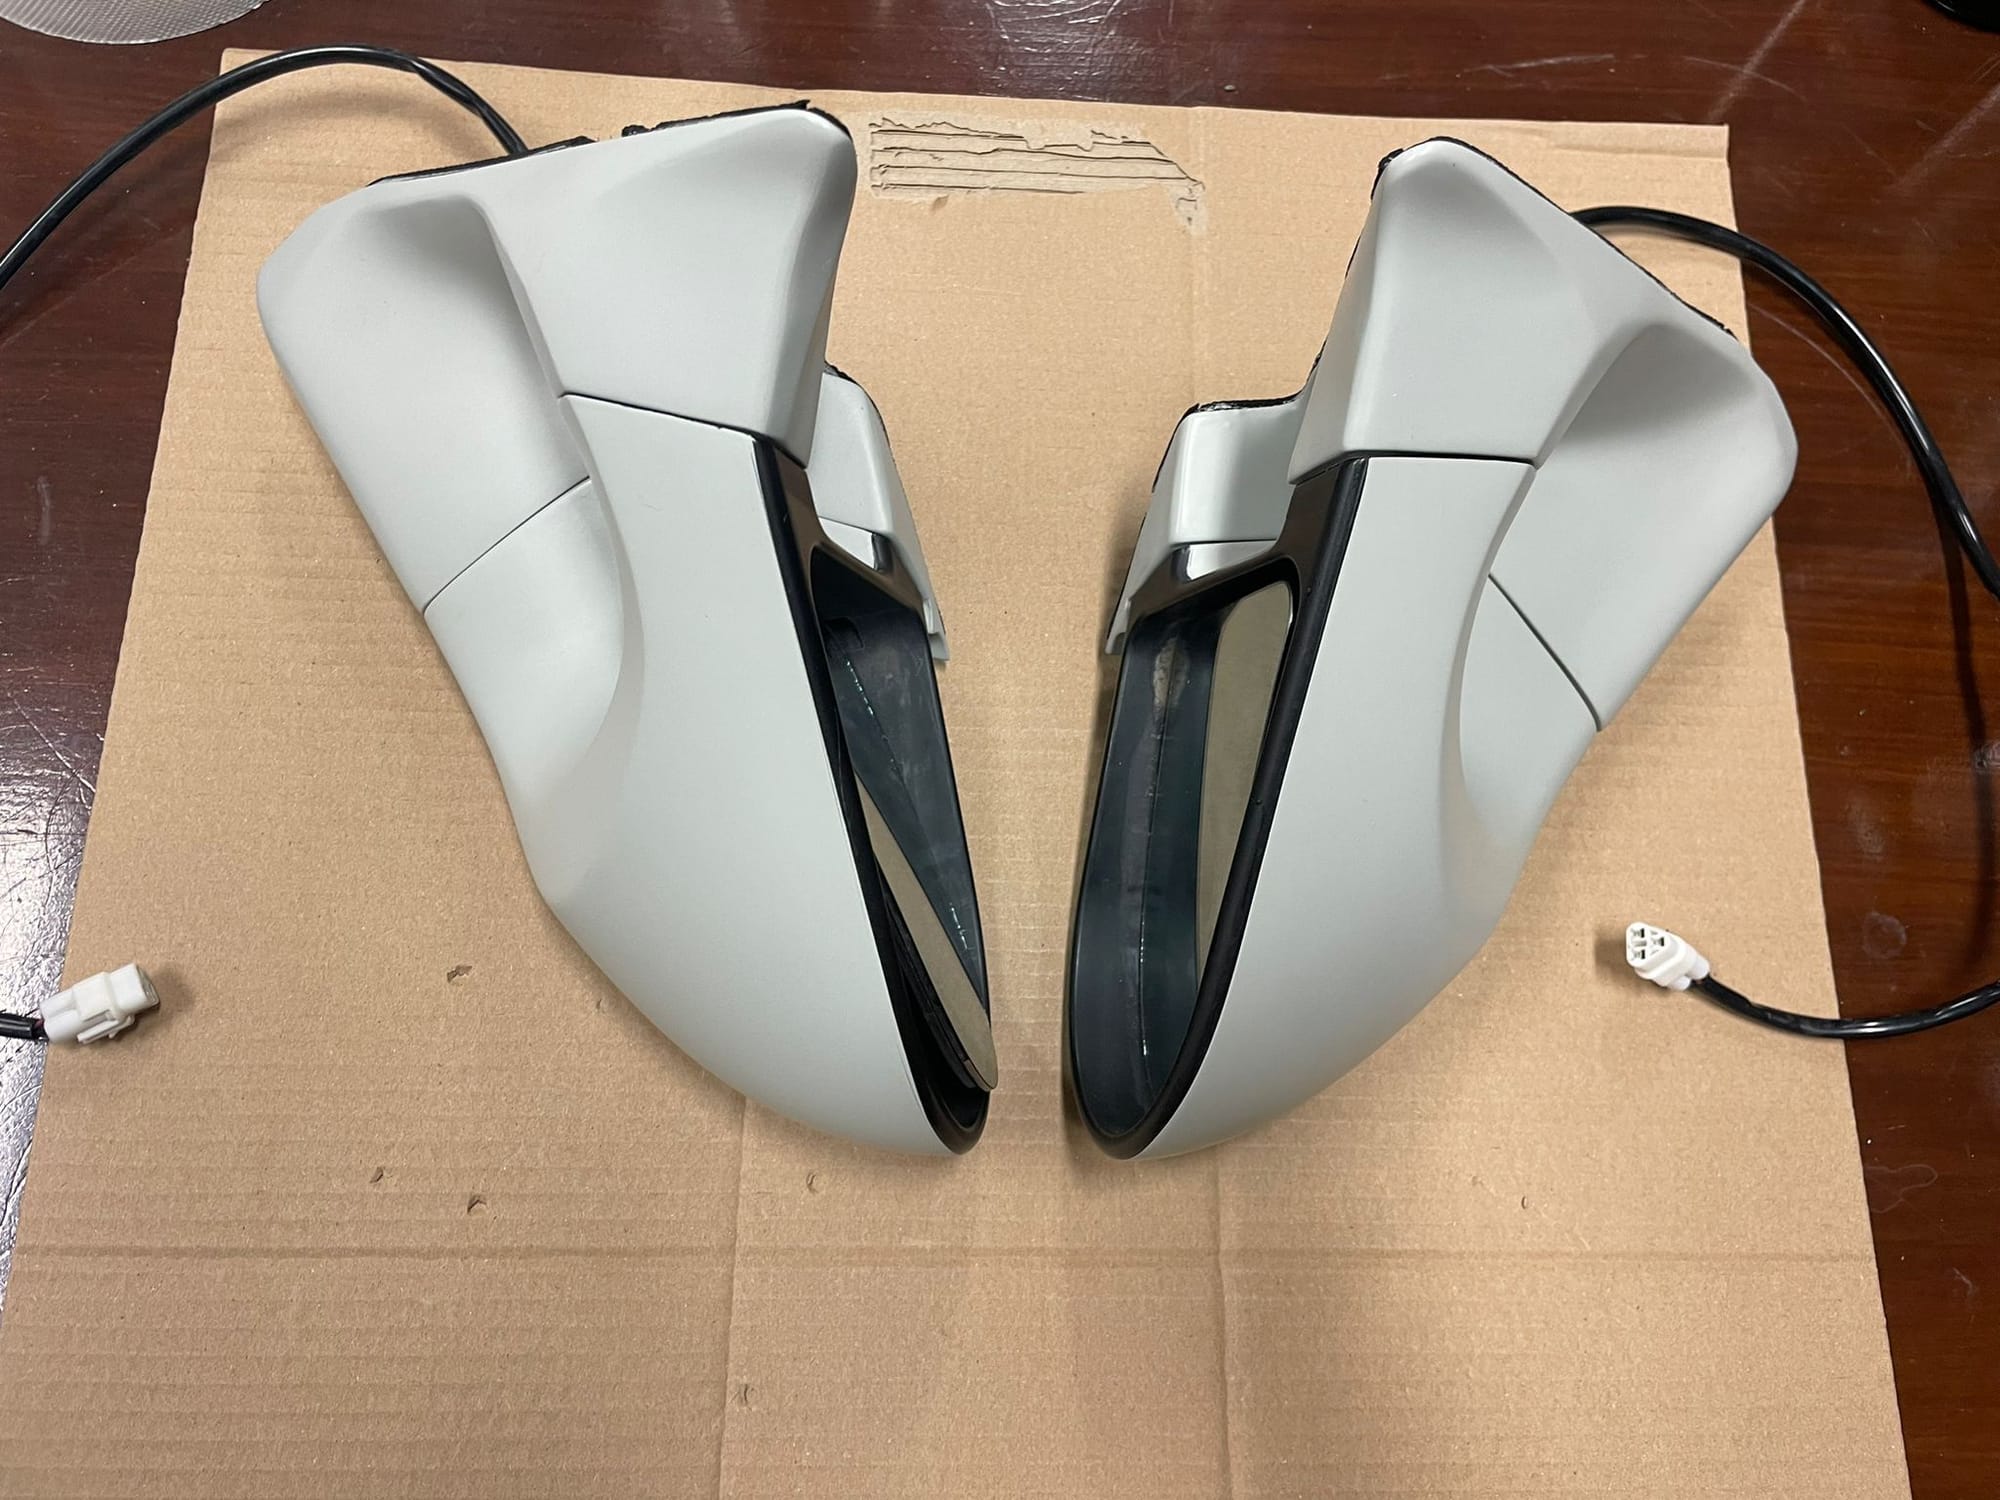 Exterior Body Parts - Authentic FD Ganador mirrors - freshly primed and ready to paint - Used - 1993 to 2002 Mazda RX-7 - Salt Lake City, UT 84102, United States